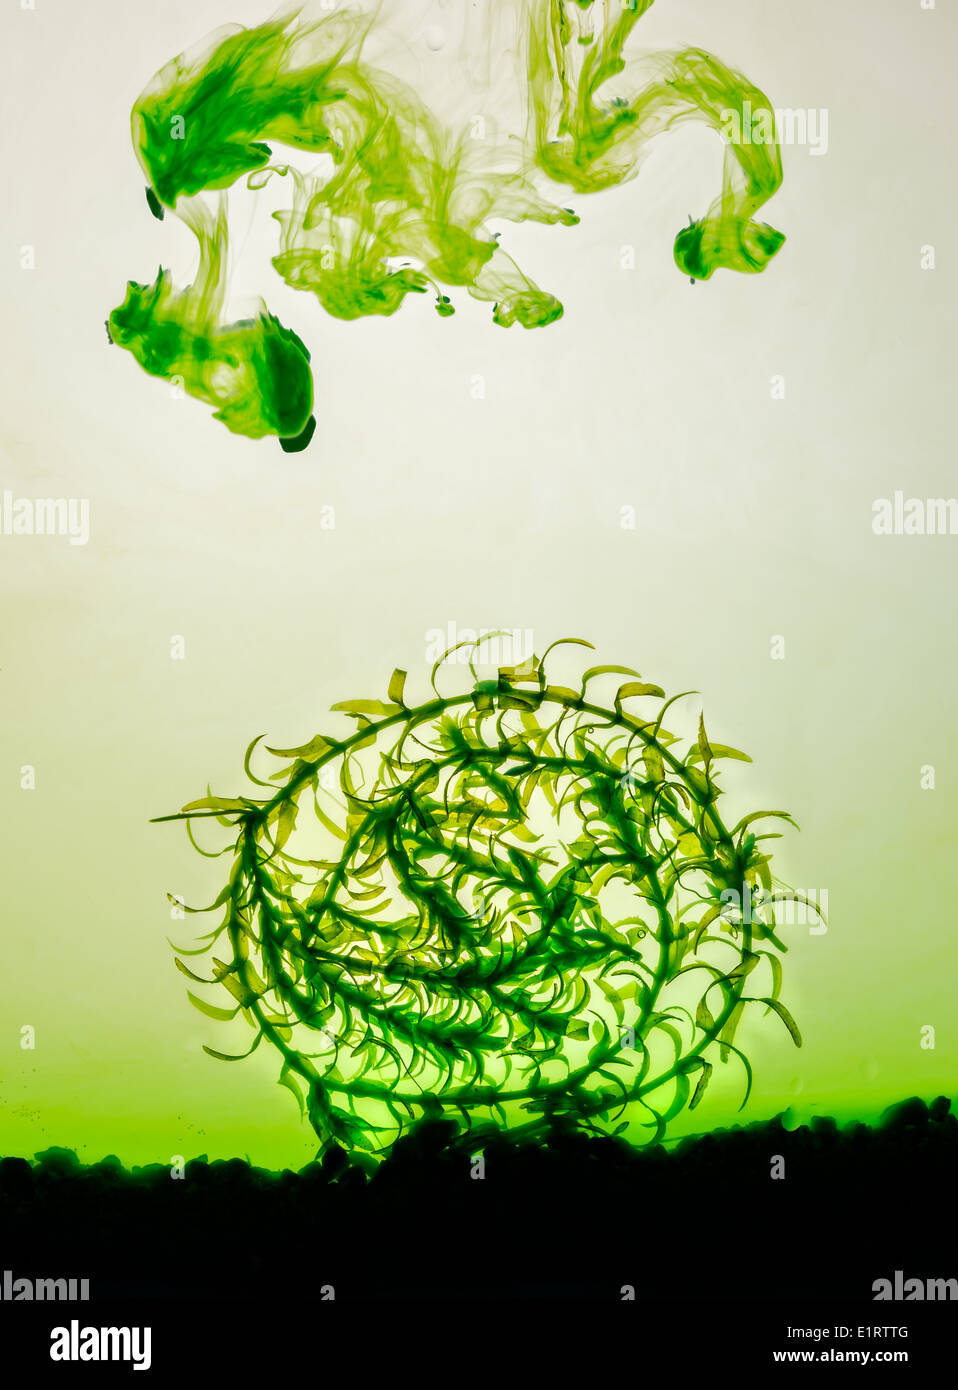 Nutrient fallout on a circular shape of waterweed Stock Photo